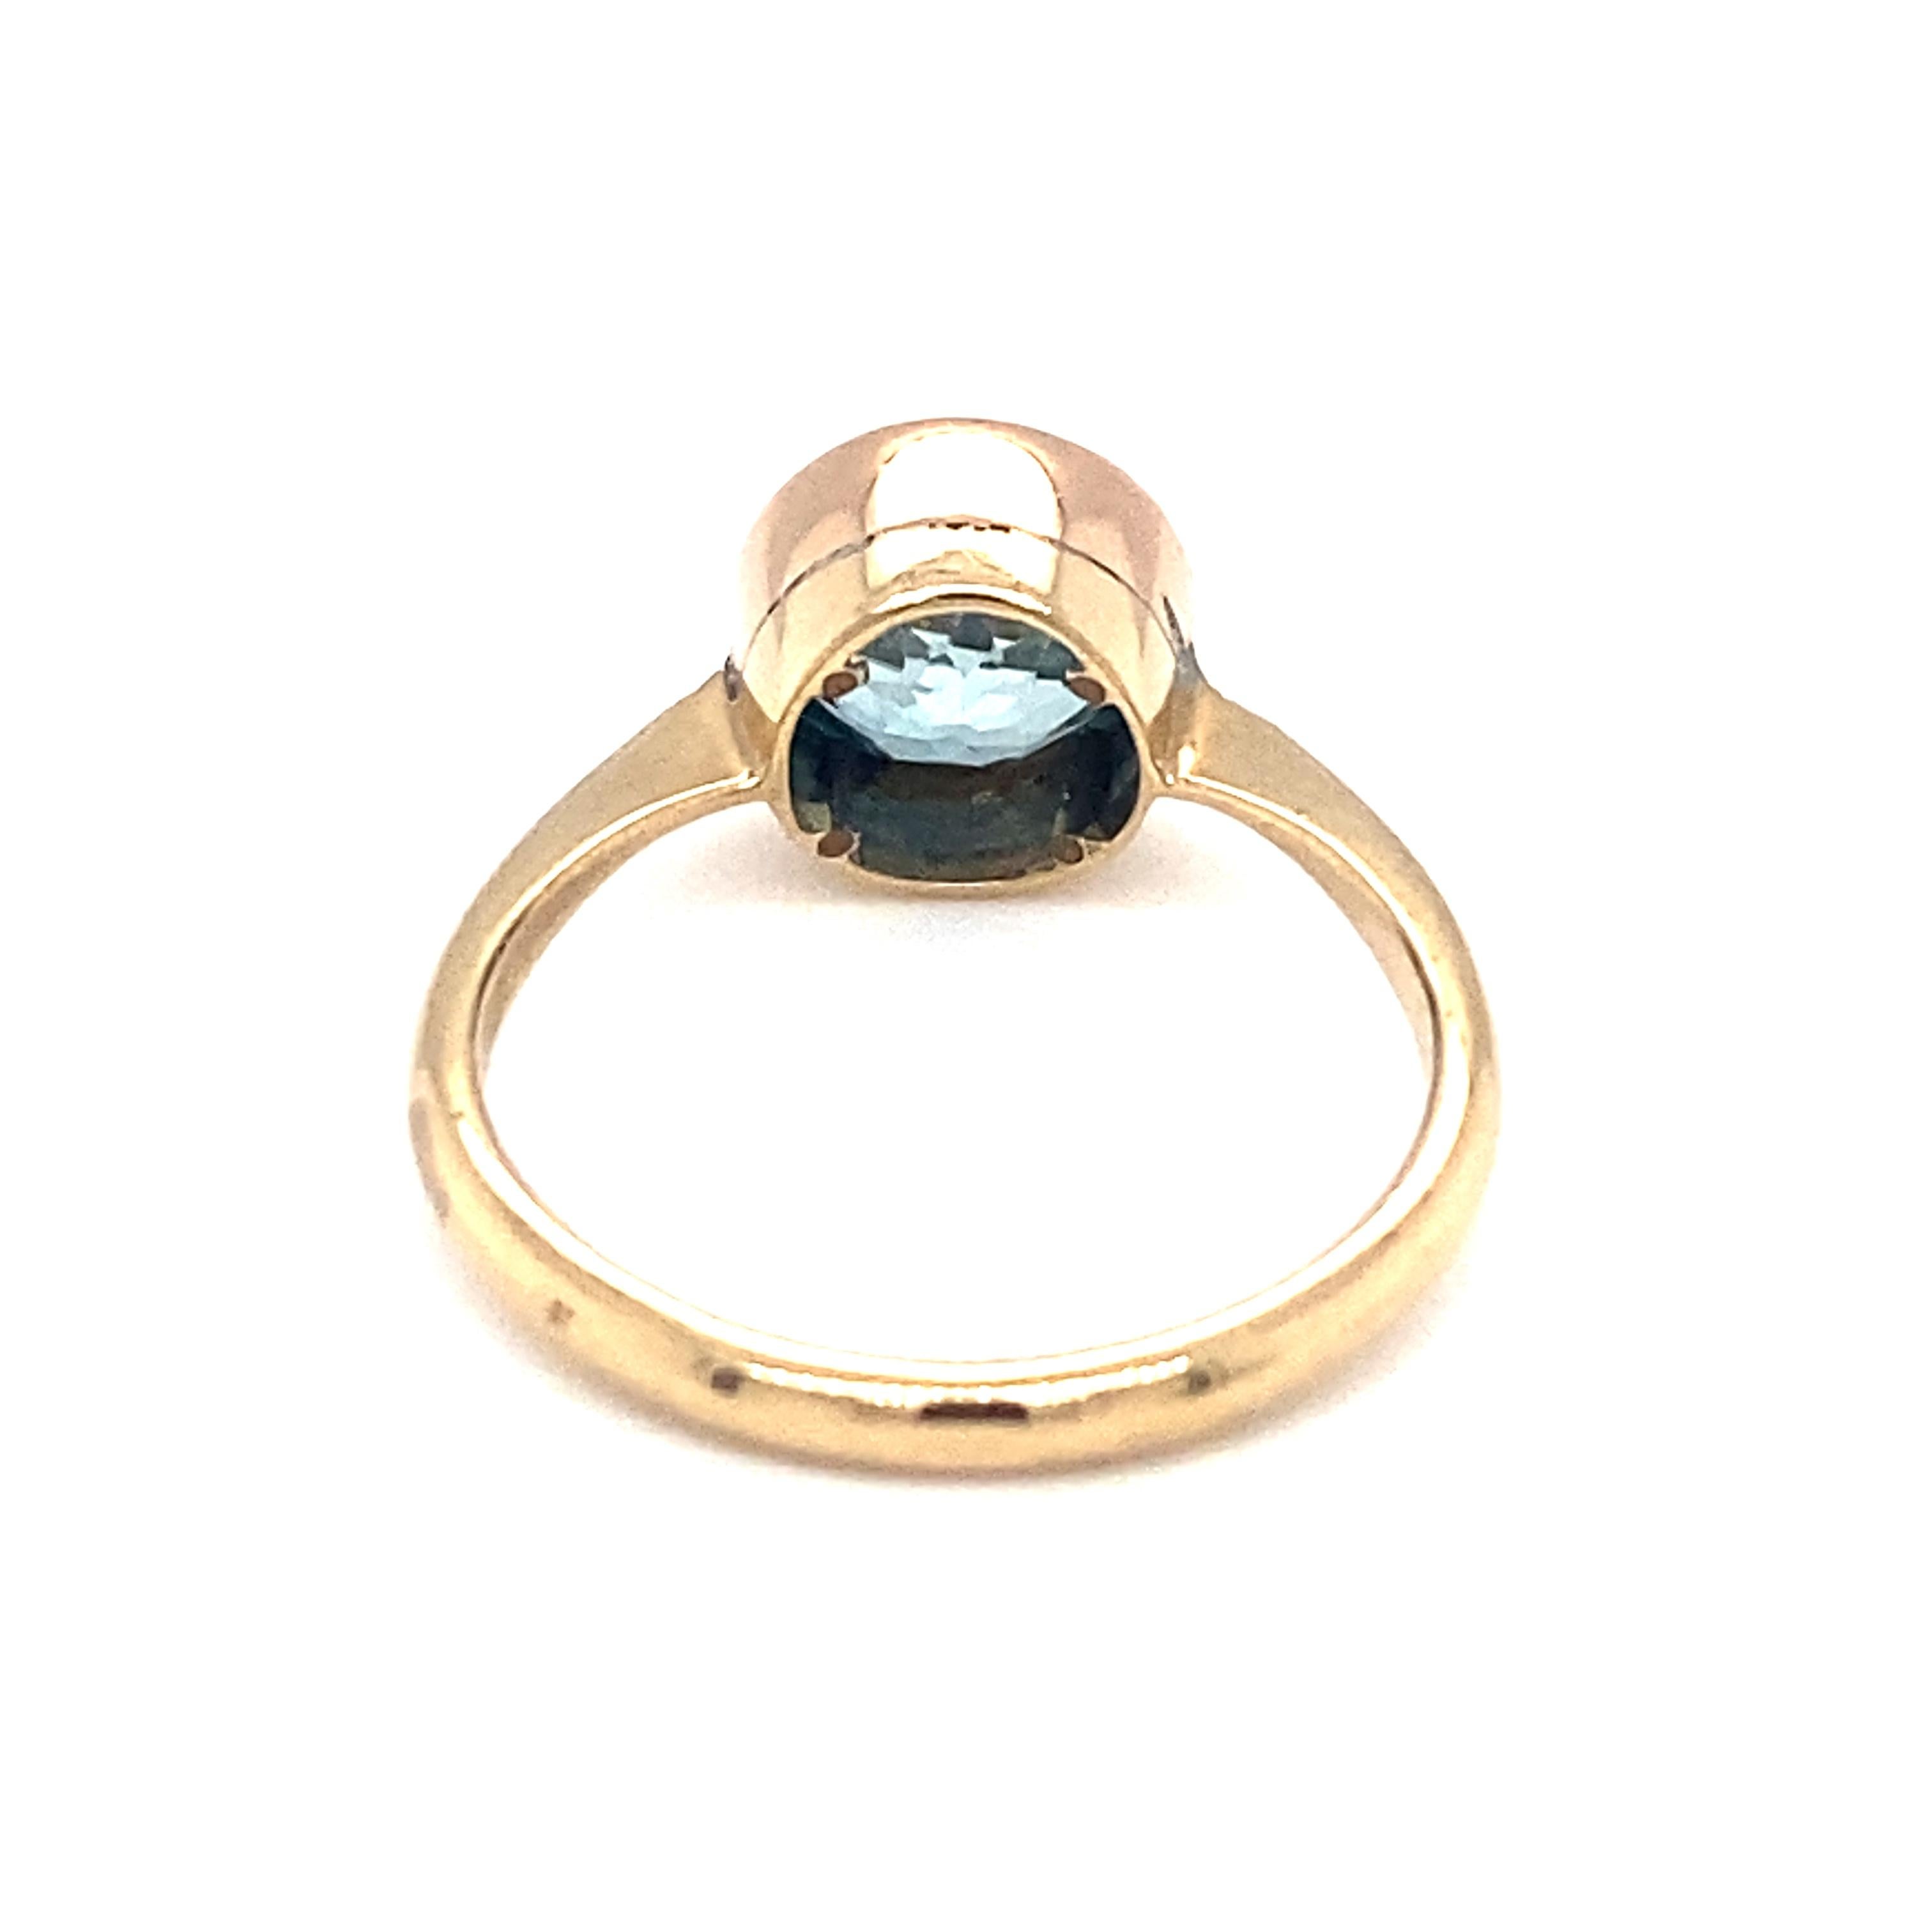 Item Details: This Victorian era ring features a brilliant blue zircon as the center stone with attractive milgrain around the bezel.

Circa: 1890s
Metal Type: 9 karat yellow gold
Weight: 2.7 grams
Size: US 7.5, resizable

Blue Zircon Details:
Cut: